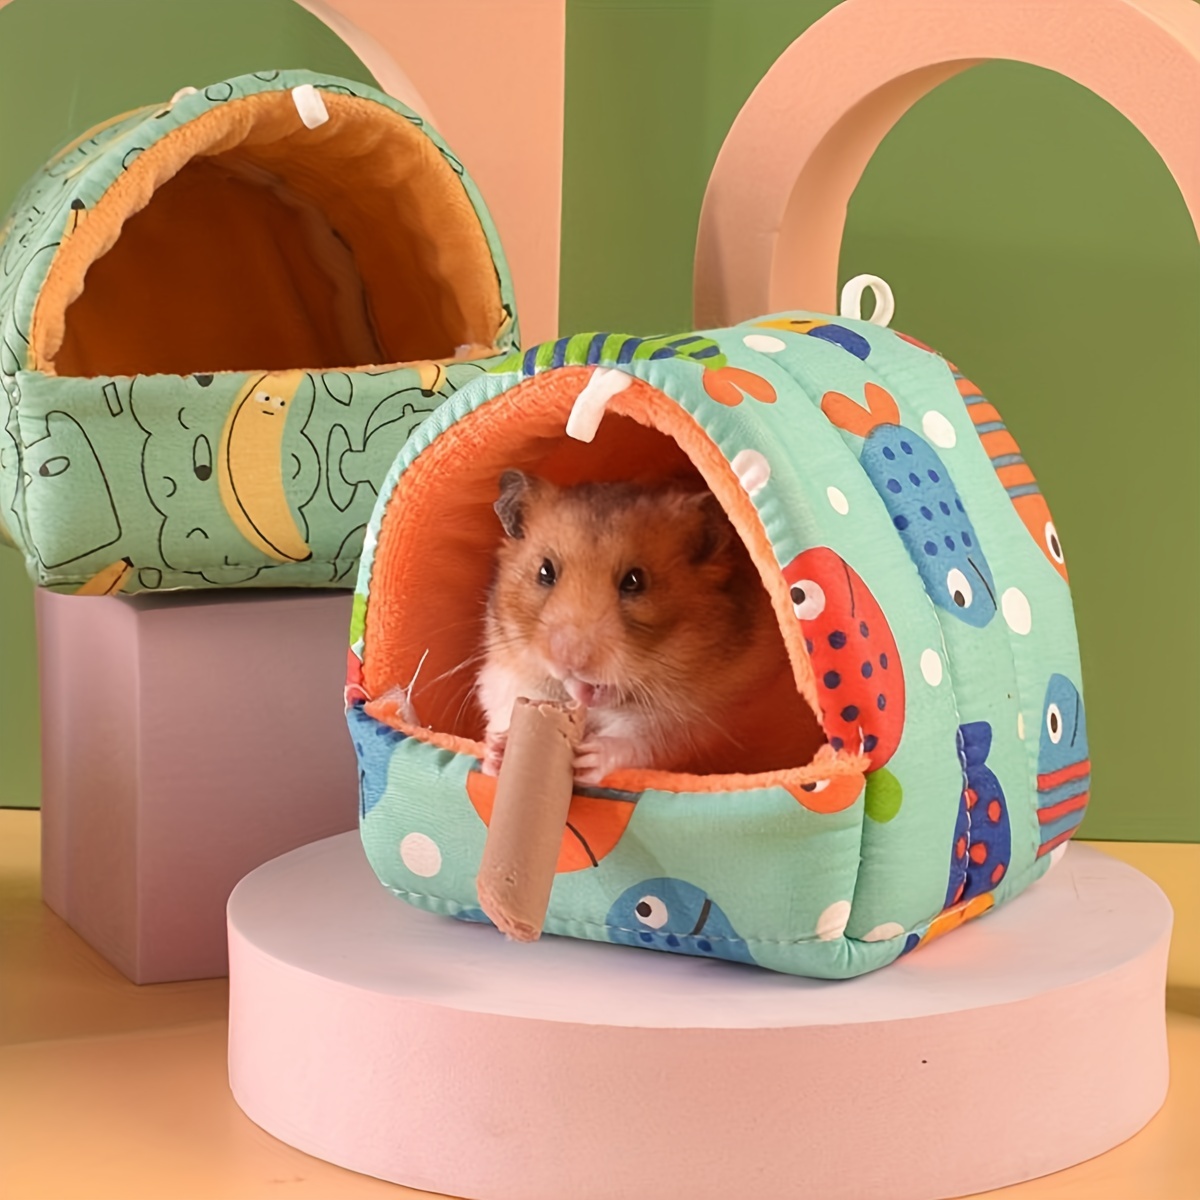 

Cozy Cartoon Guinea Pig Bed - Warm Sleeping Cushion For Small Animals, Perfect For Hamsters, Squirrels, Hedgehogs, And More!